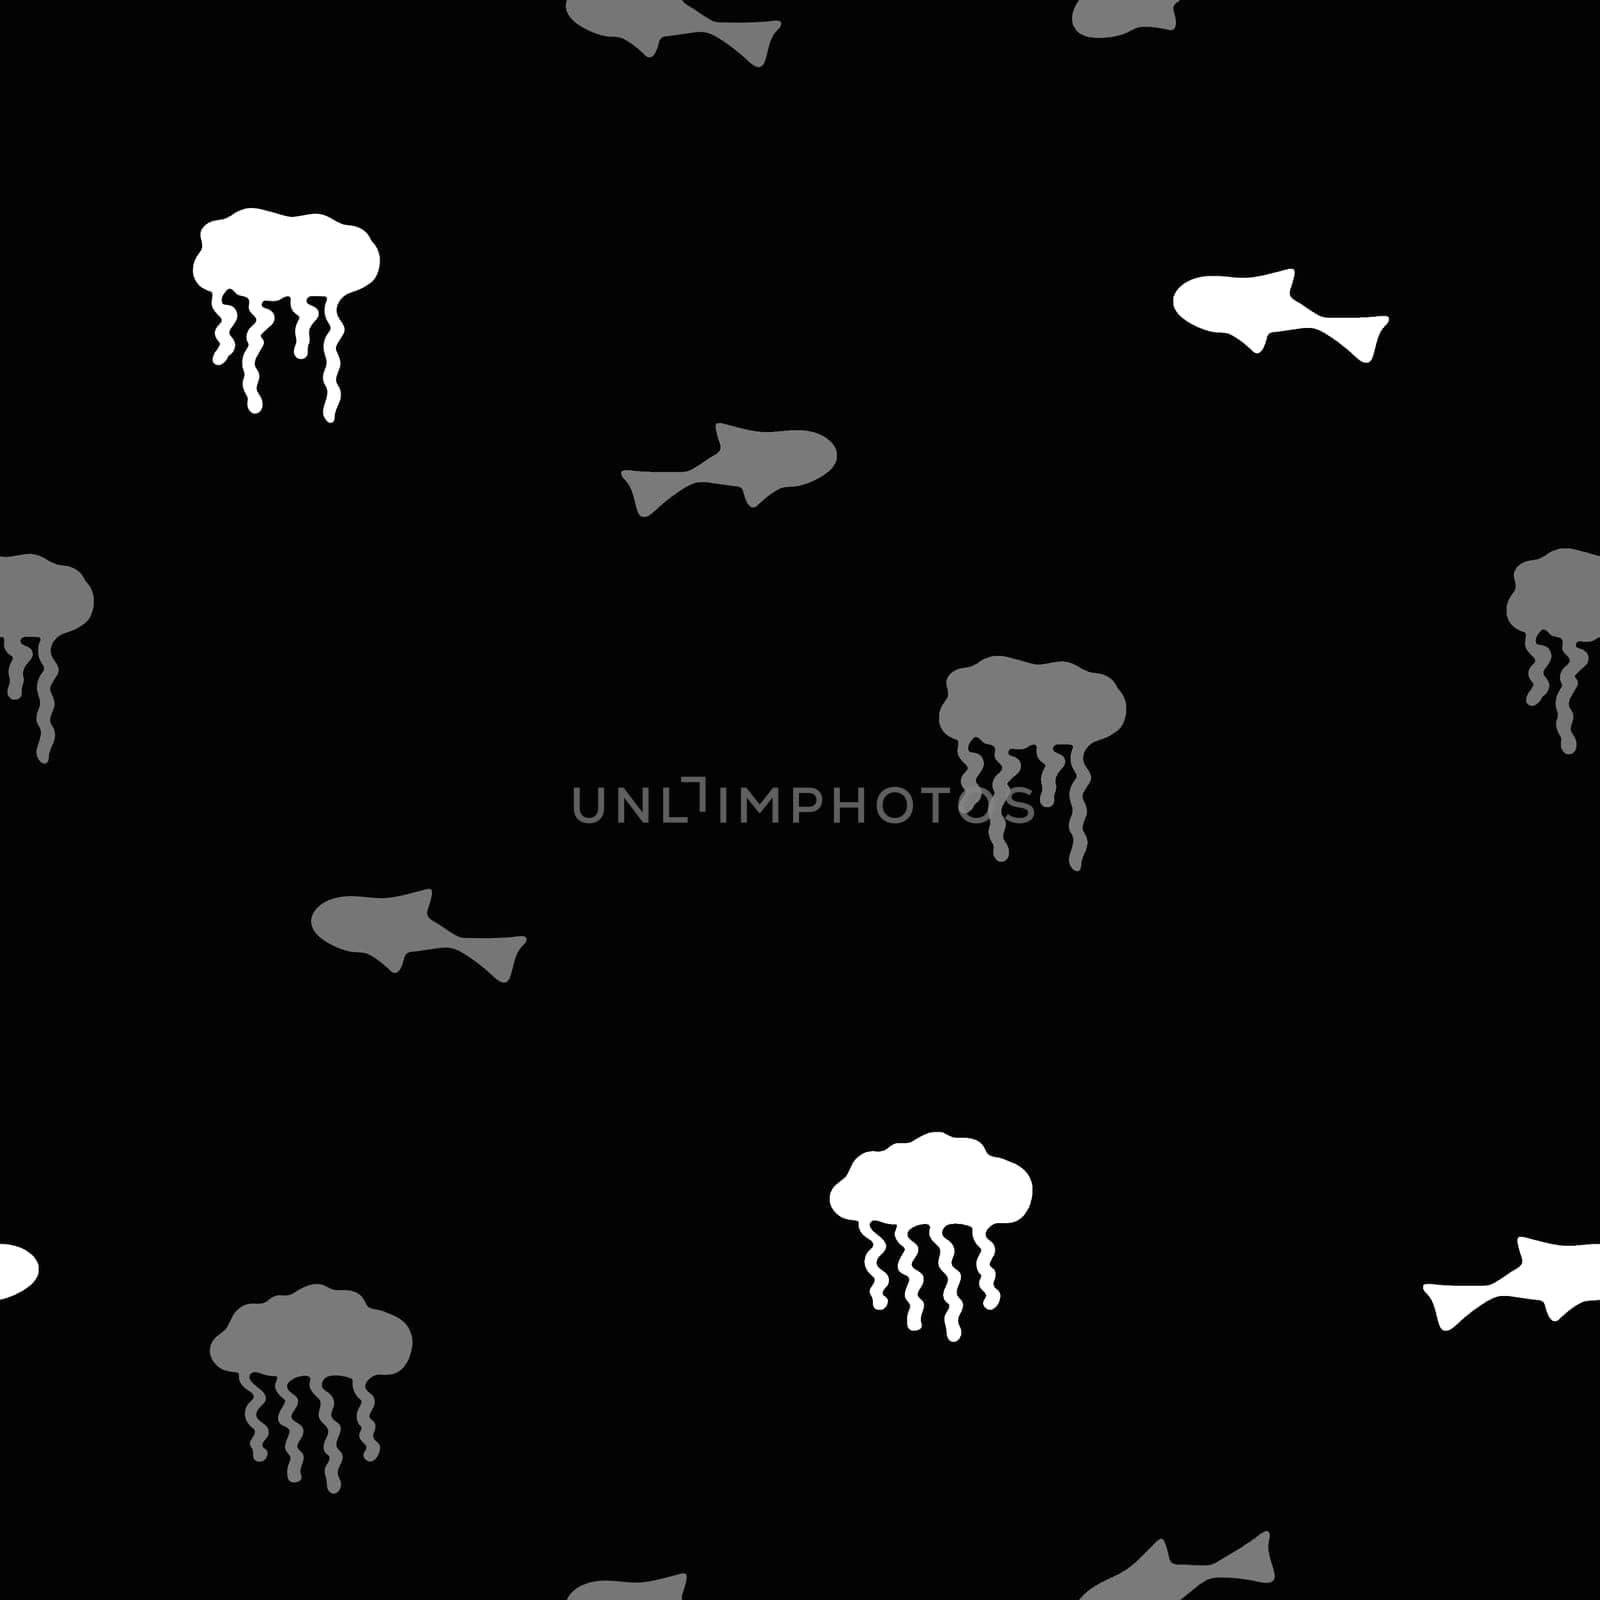 Hand Drawn Underwater World Seamless Pattern. Sea Life Digital Paper with Jelly Fish and Fish Silhouettes in Black and White.